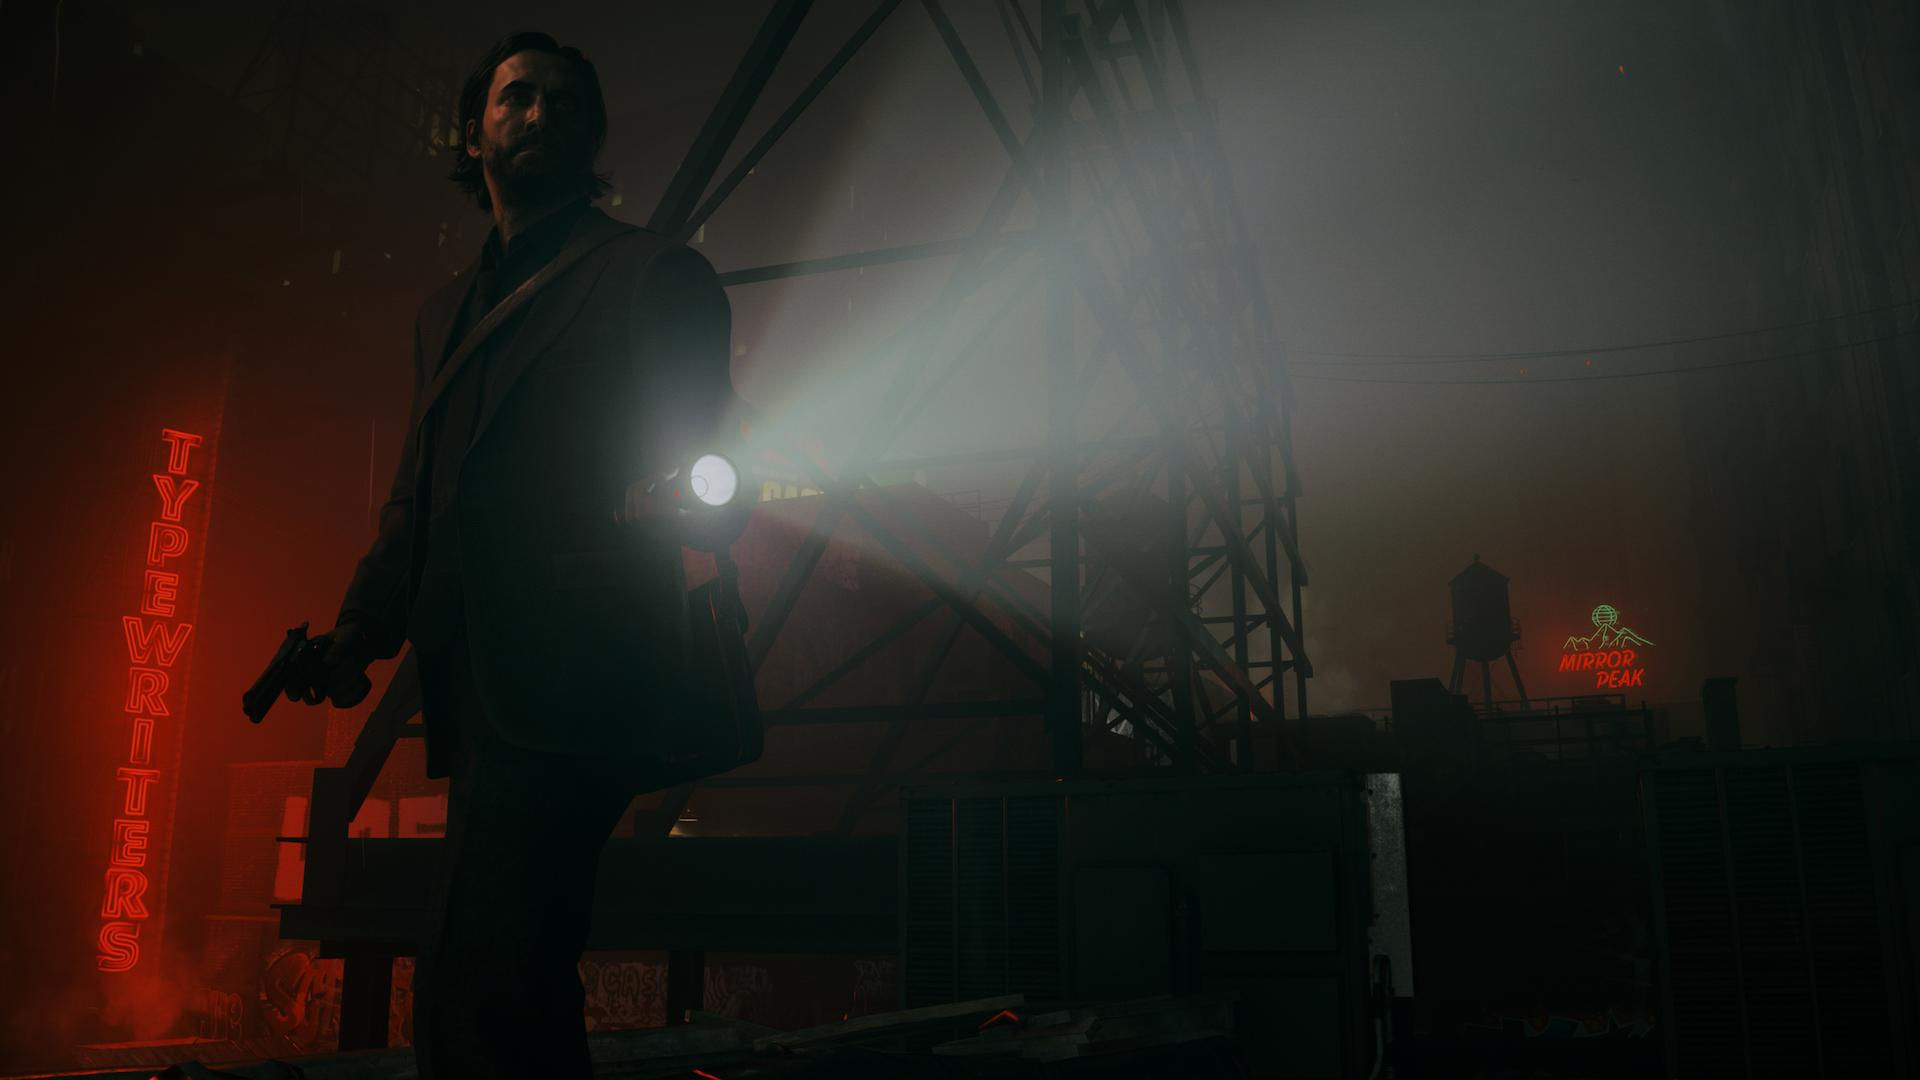 Alan Wake 2 Release Date, Gameplay Trailer & More – My Tech Piece